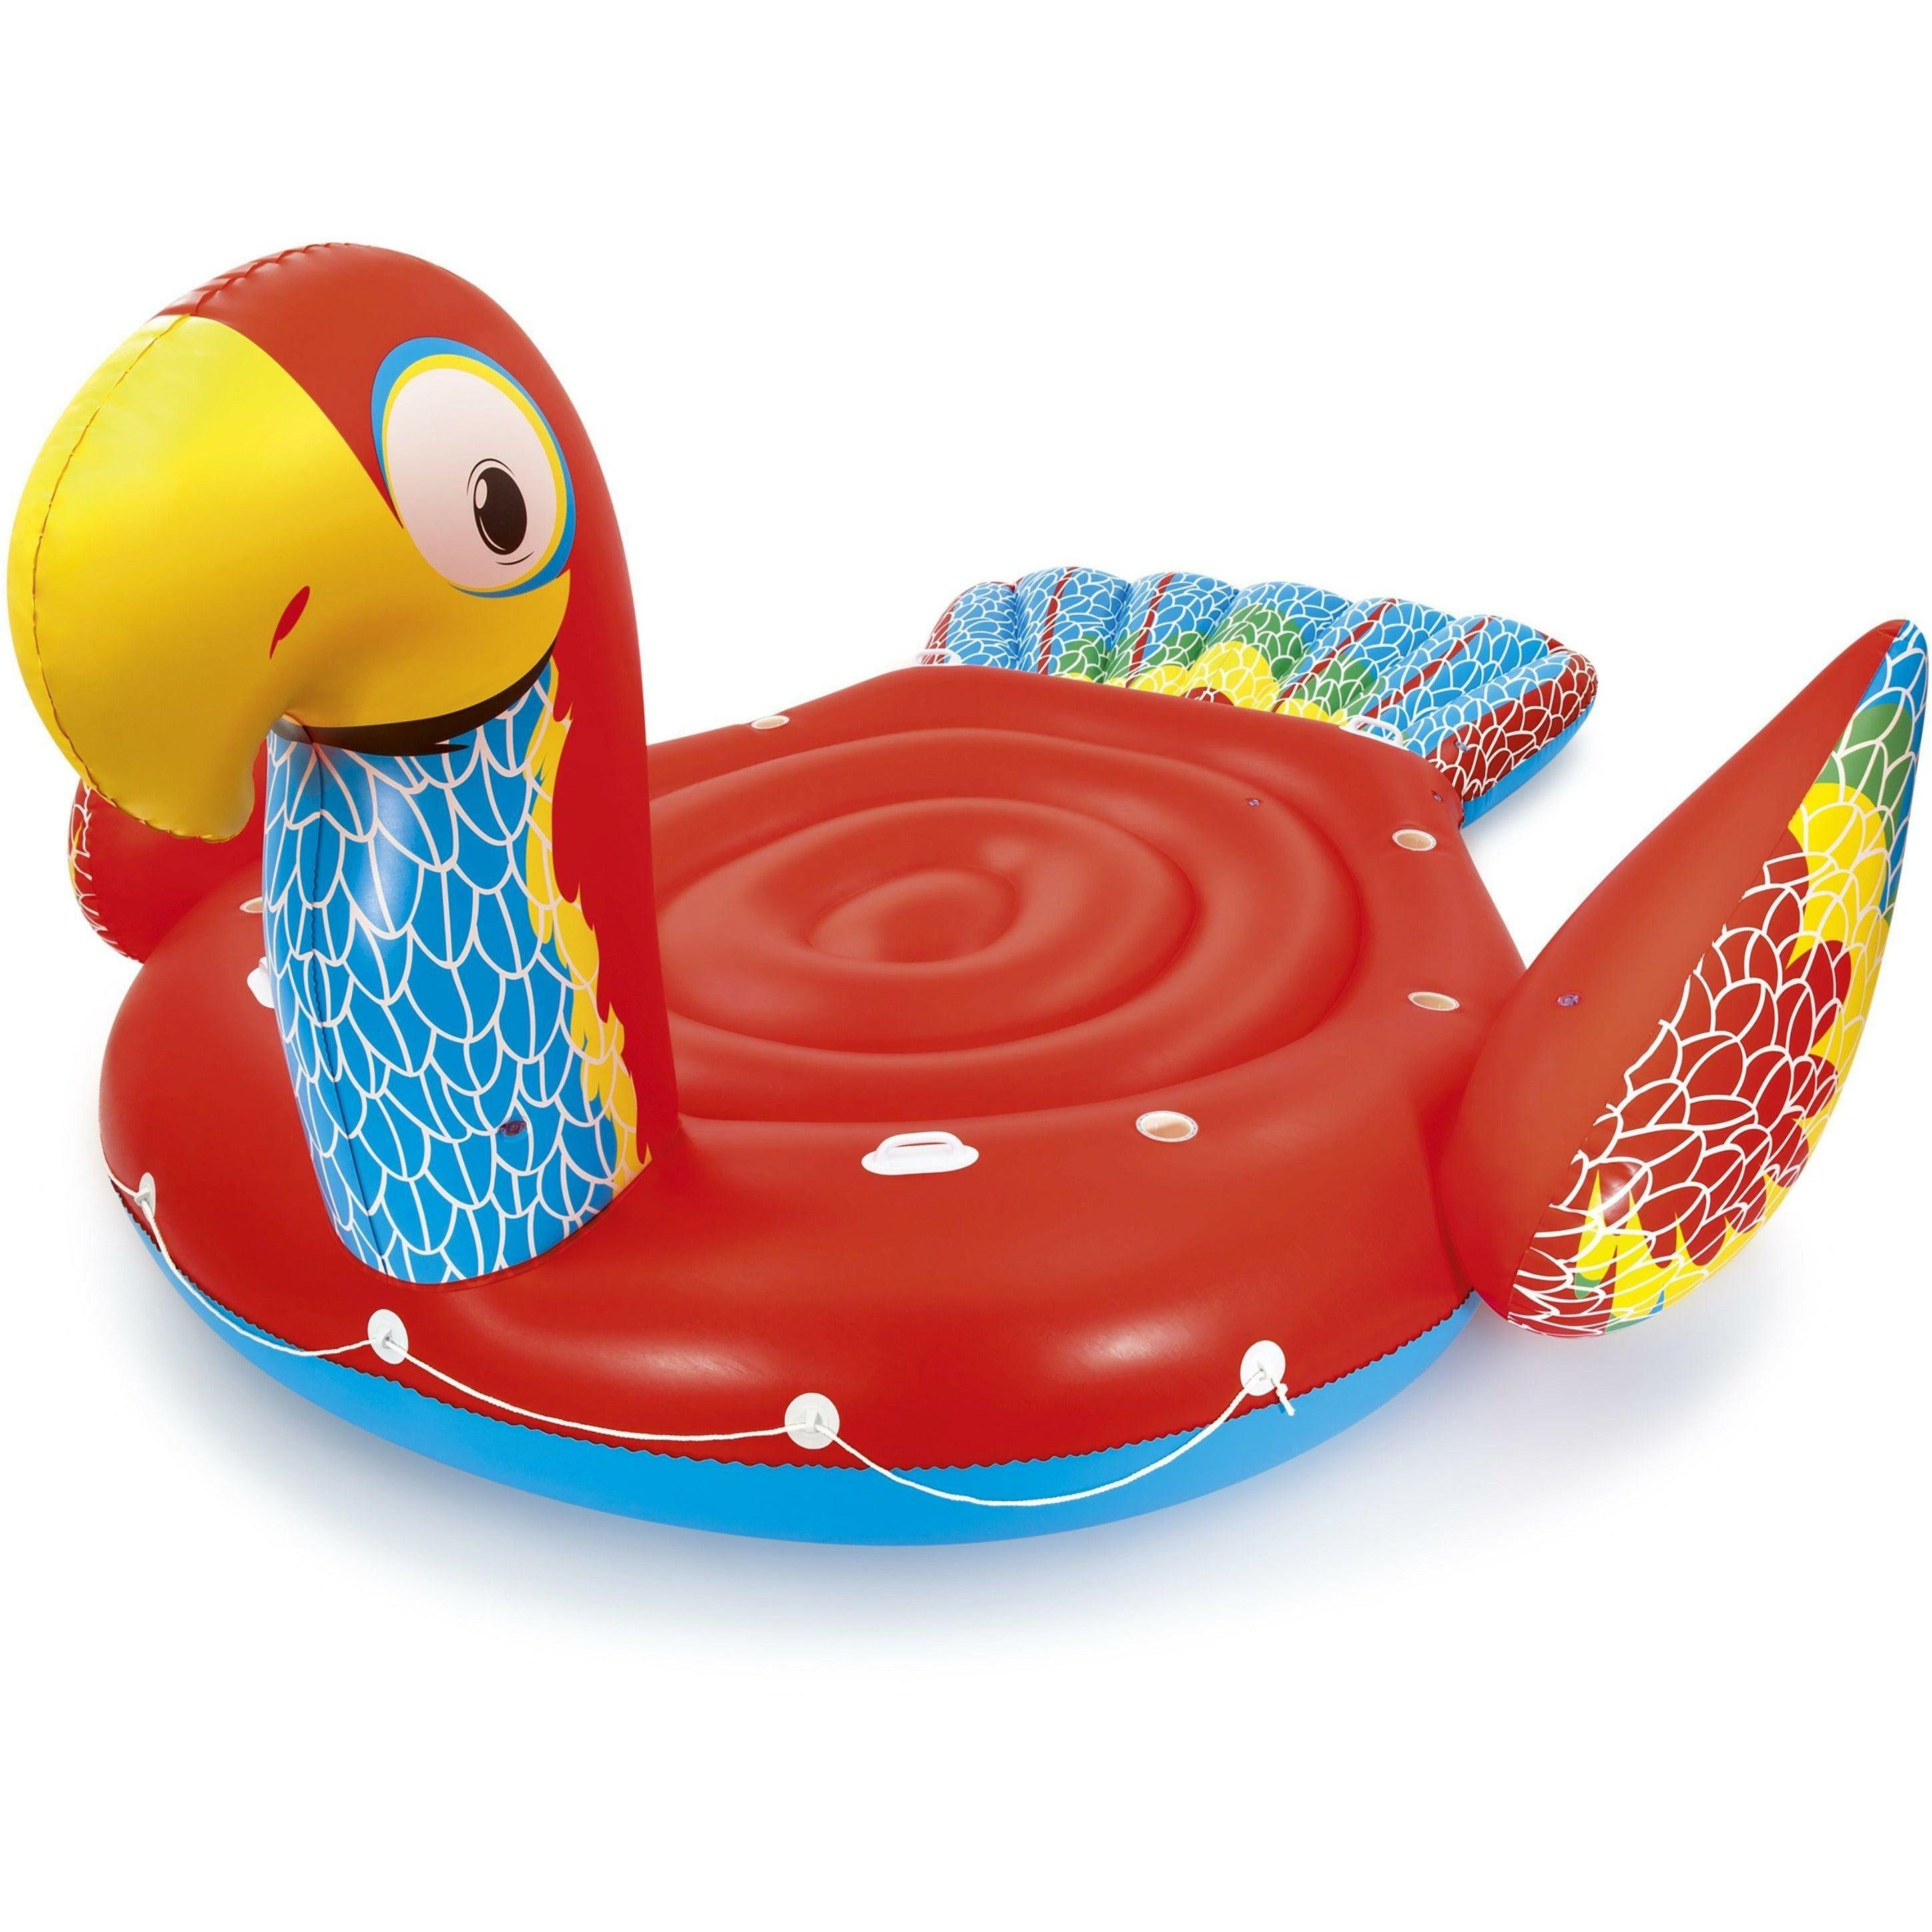 Bestway Inflatable Parrot Shaped Ride-On Float - BumbleToys - 18+, Boys, Eagle Plus, flamingo, Floaters, Girls, Inflatables, Pre-Order, Sand Toys Pools & Inflatables, unicorn